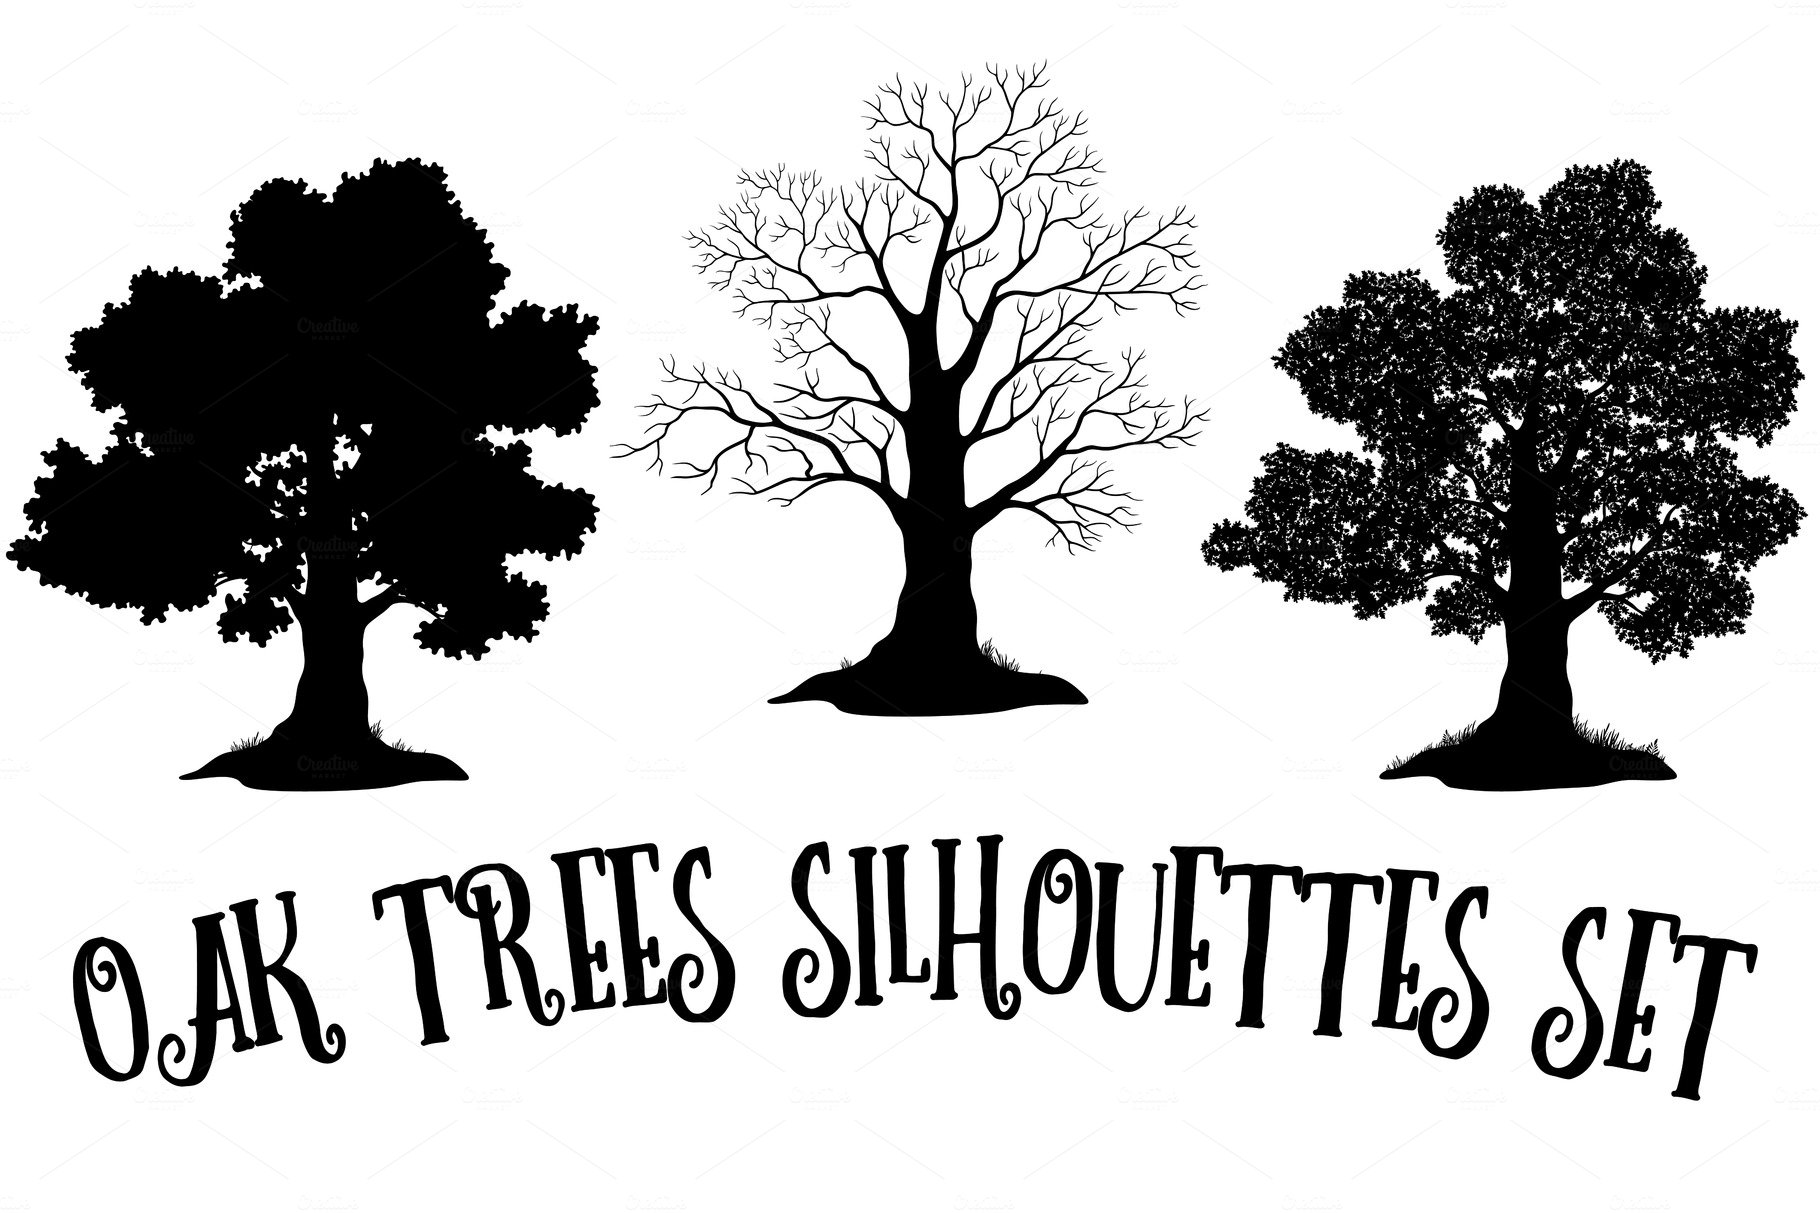 Three trees silhouettes set with the words oak trees silhouettes set.